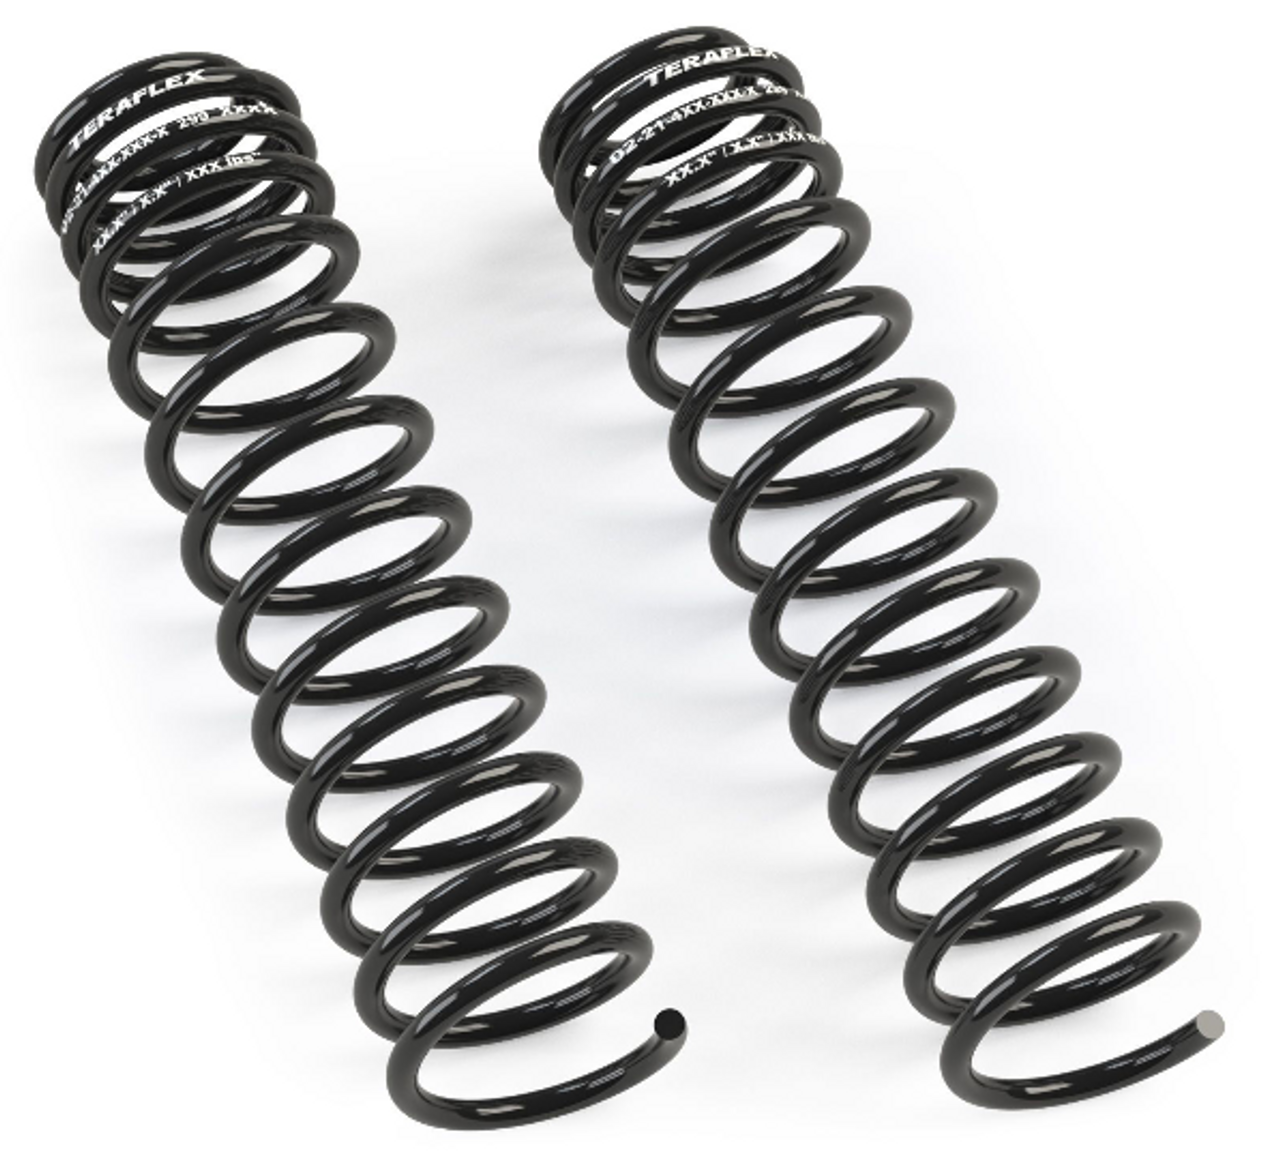 TeraFlex 1873000 Front Coil Spring Pair- 3.5" Lift for Jeep Gladiator JT 2020+